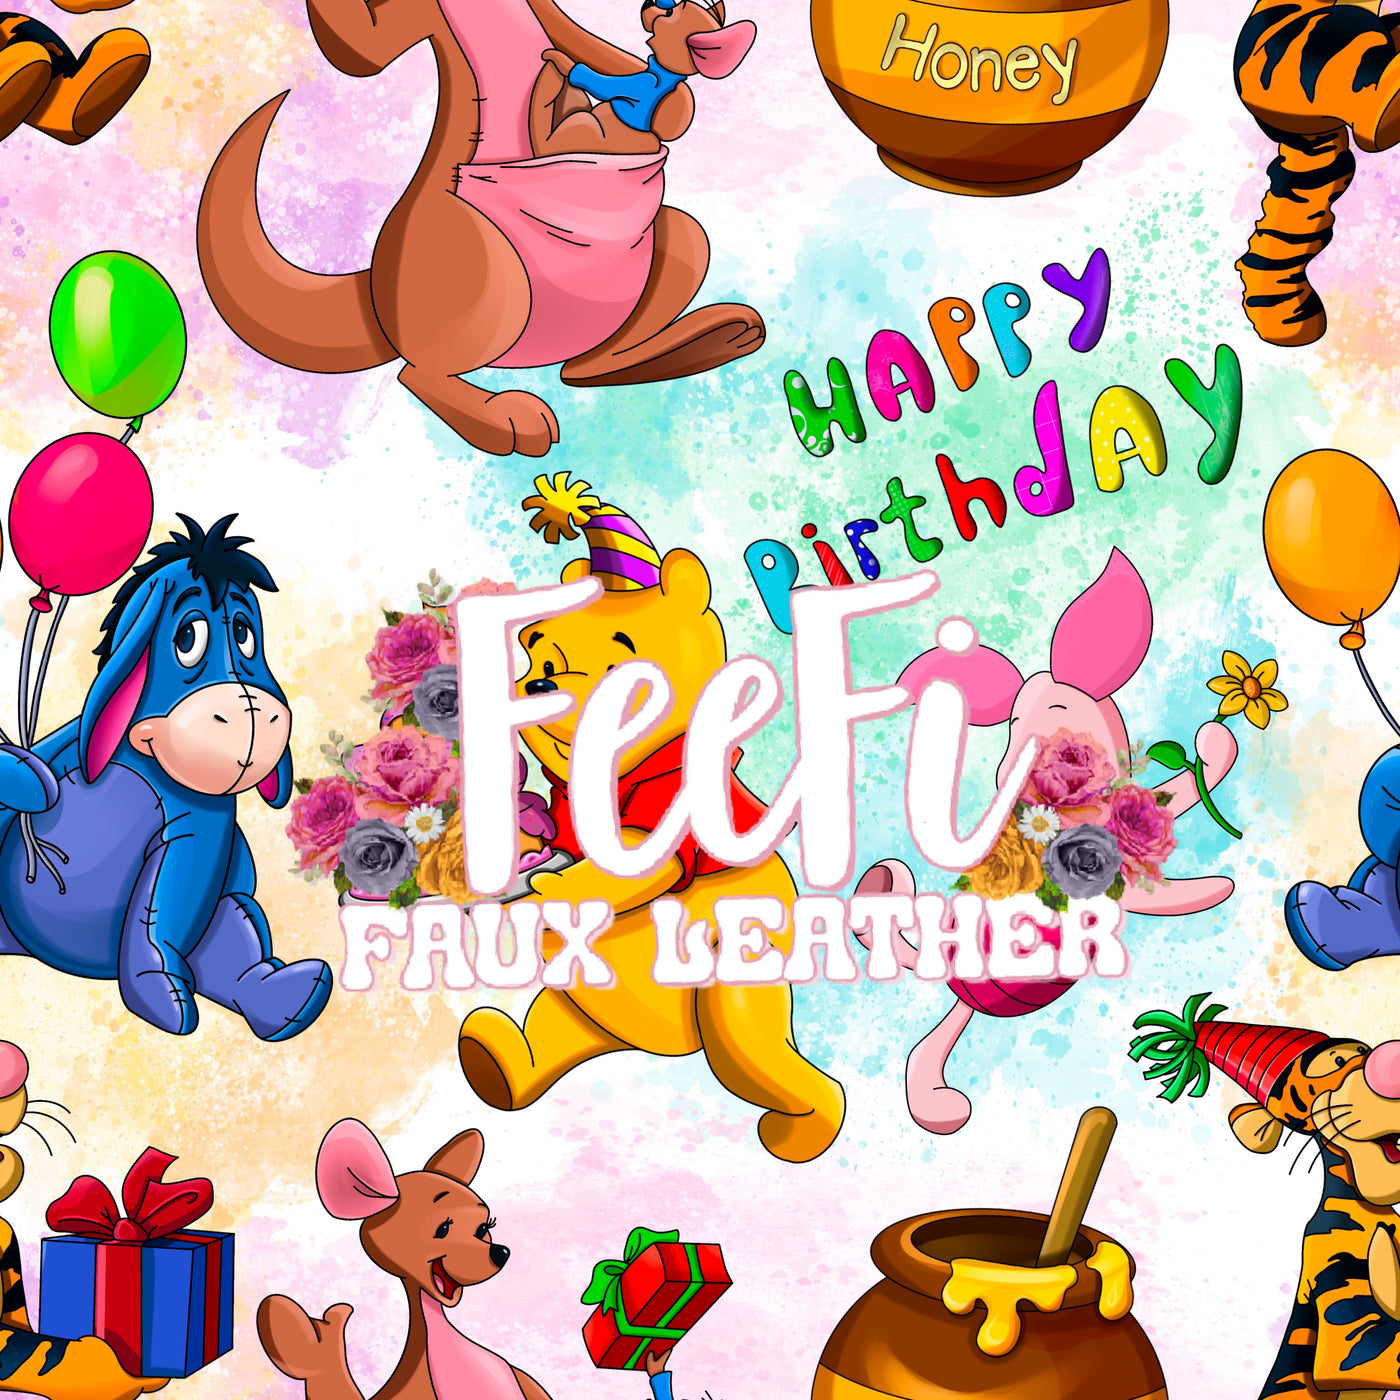 Winnie The Pooh Birthday Litchi Printed Faux Leather Sheet Litchi has a pebble like feel with bright colors